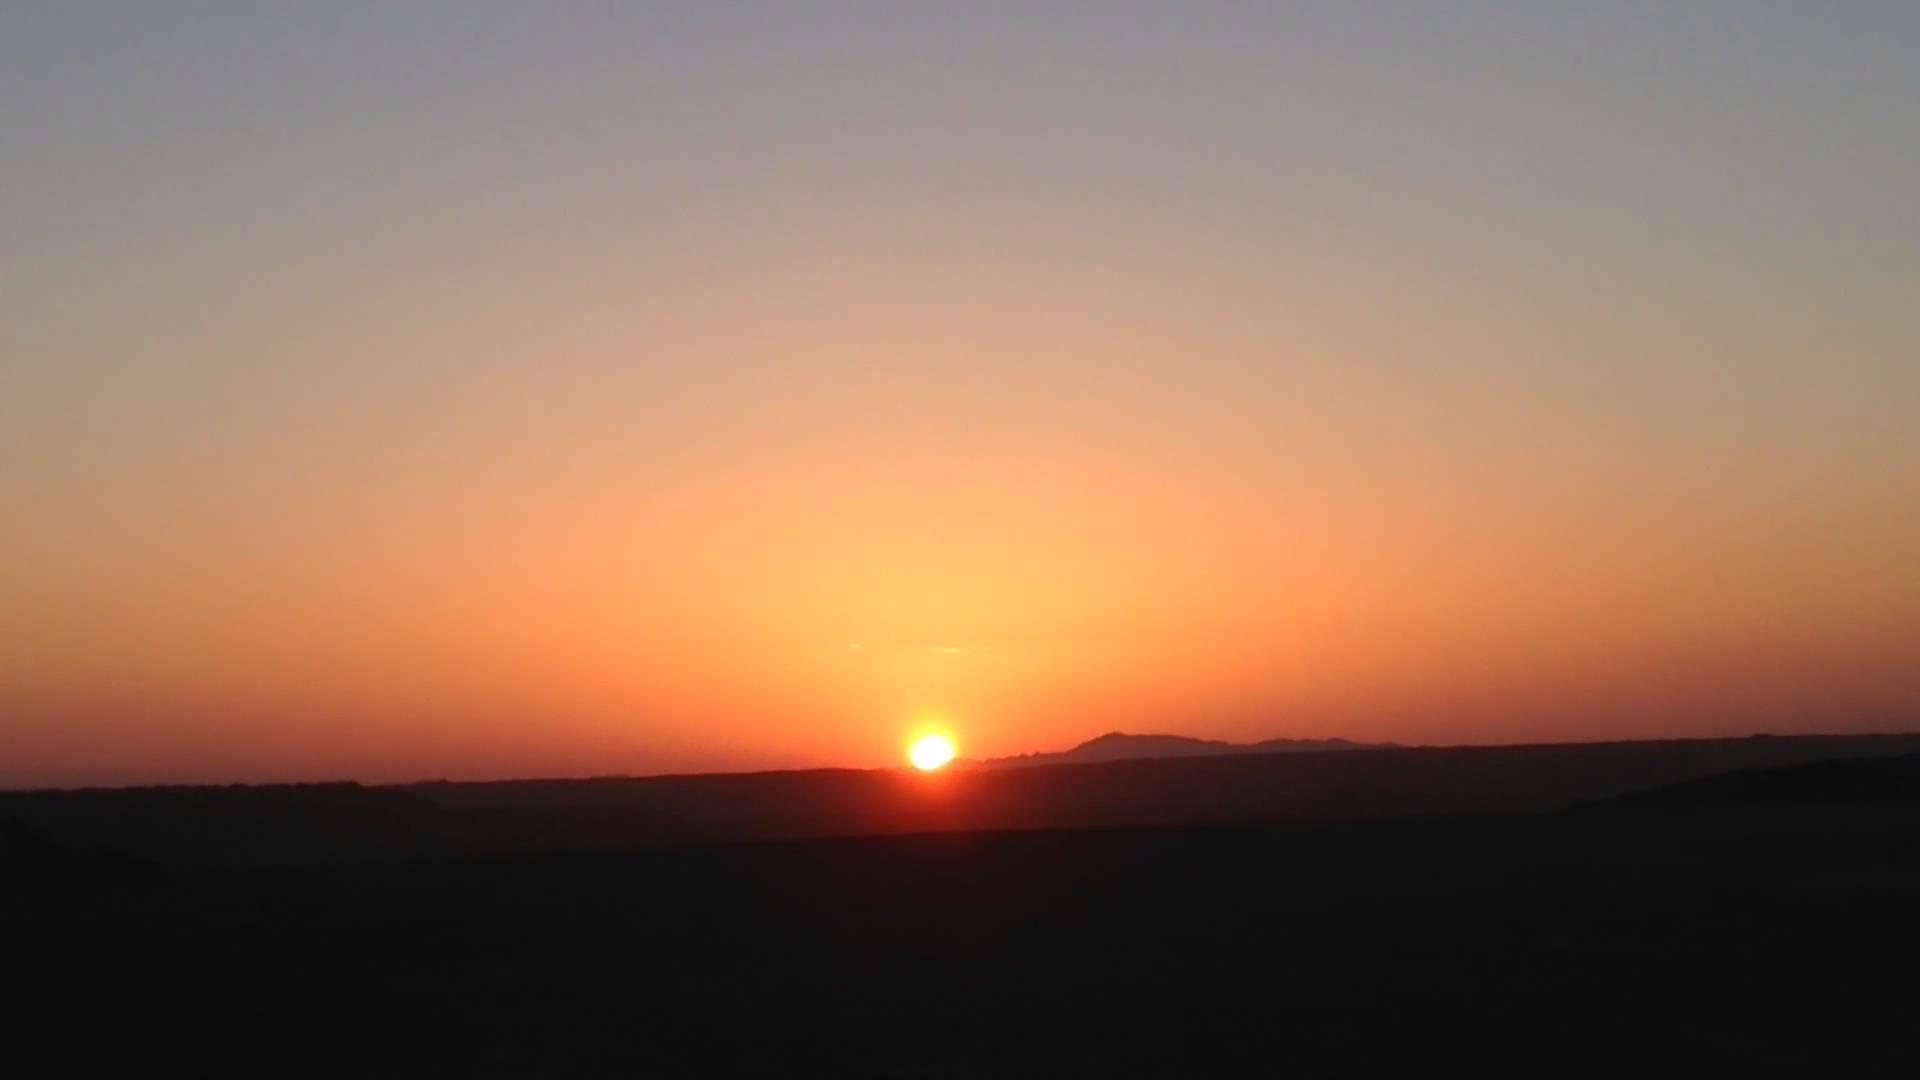 Have you seen the beauty that the sun sets with gobi?